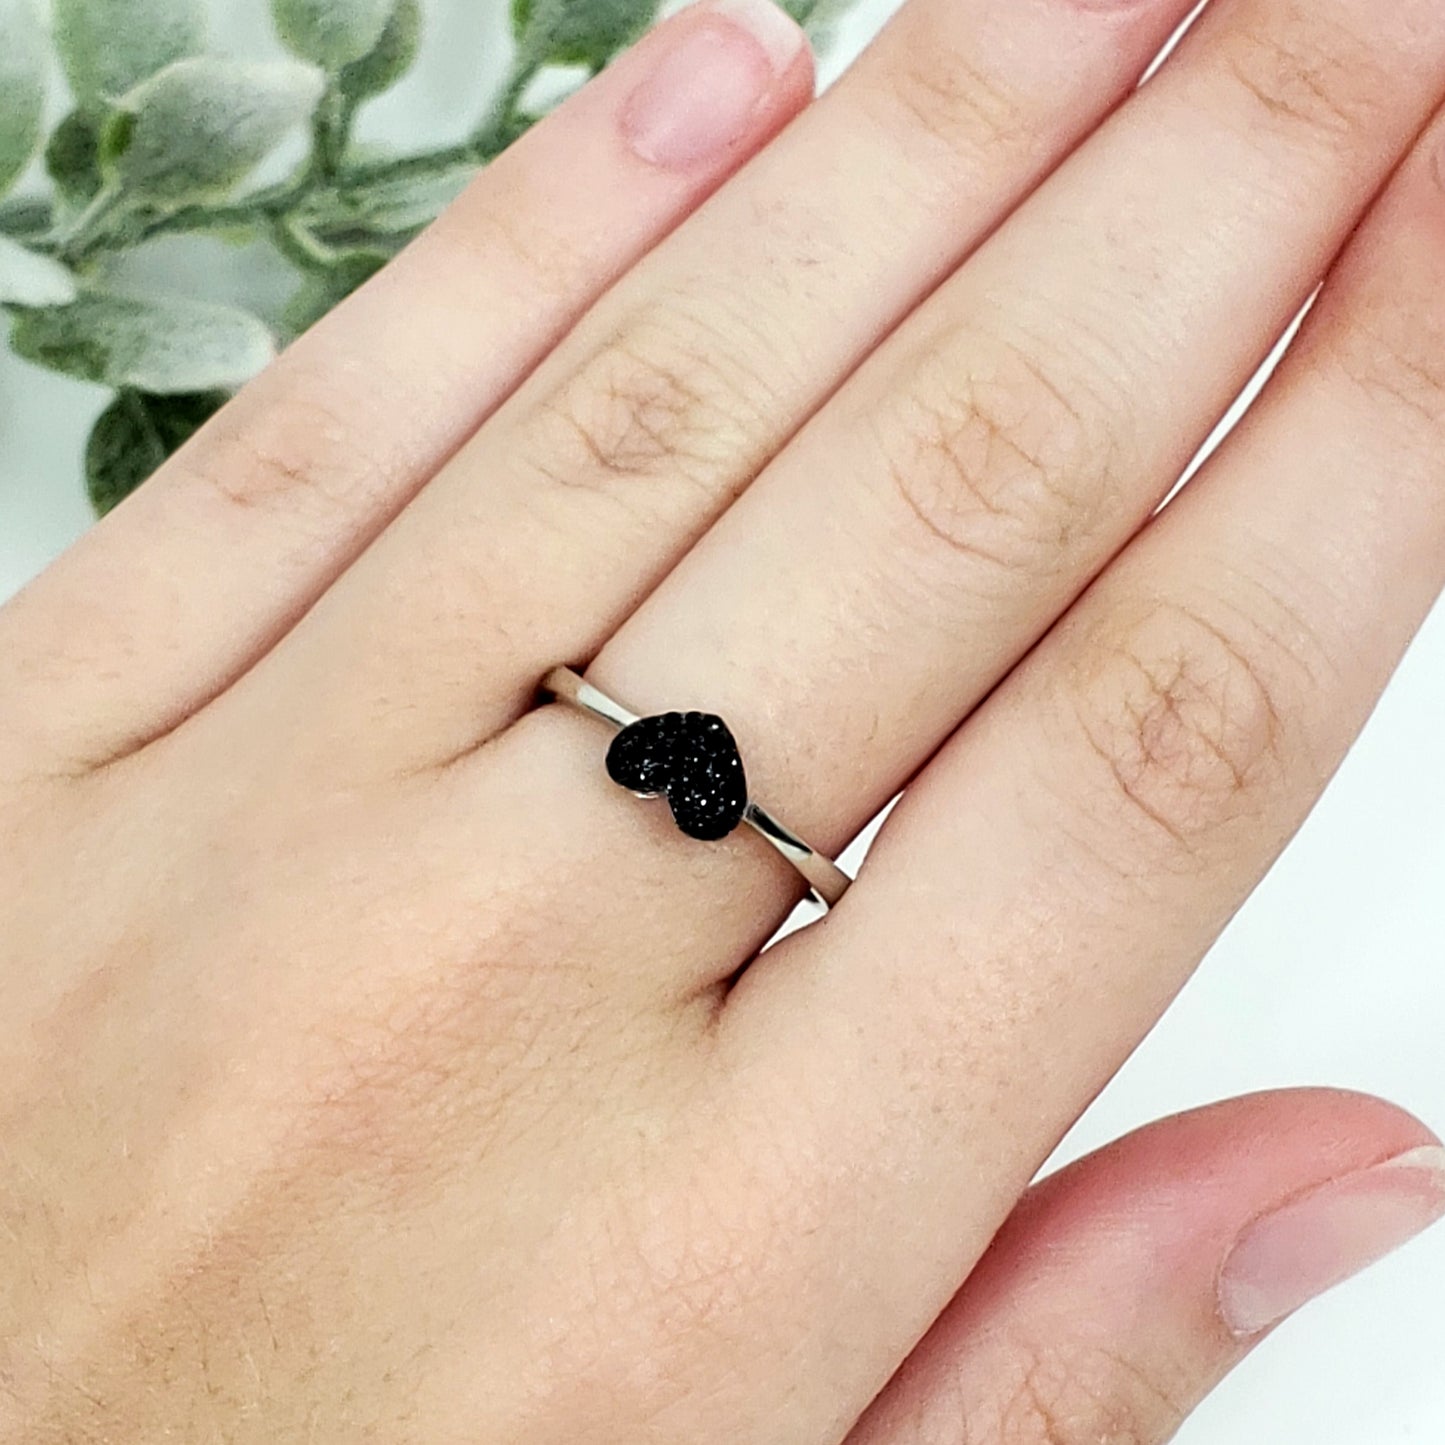 Protective Black Spinel Heart Shaped Ring